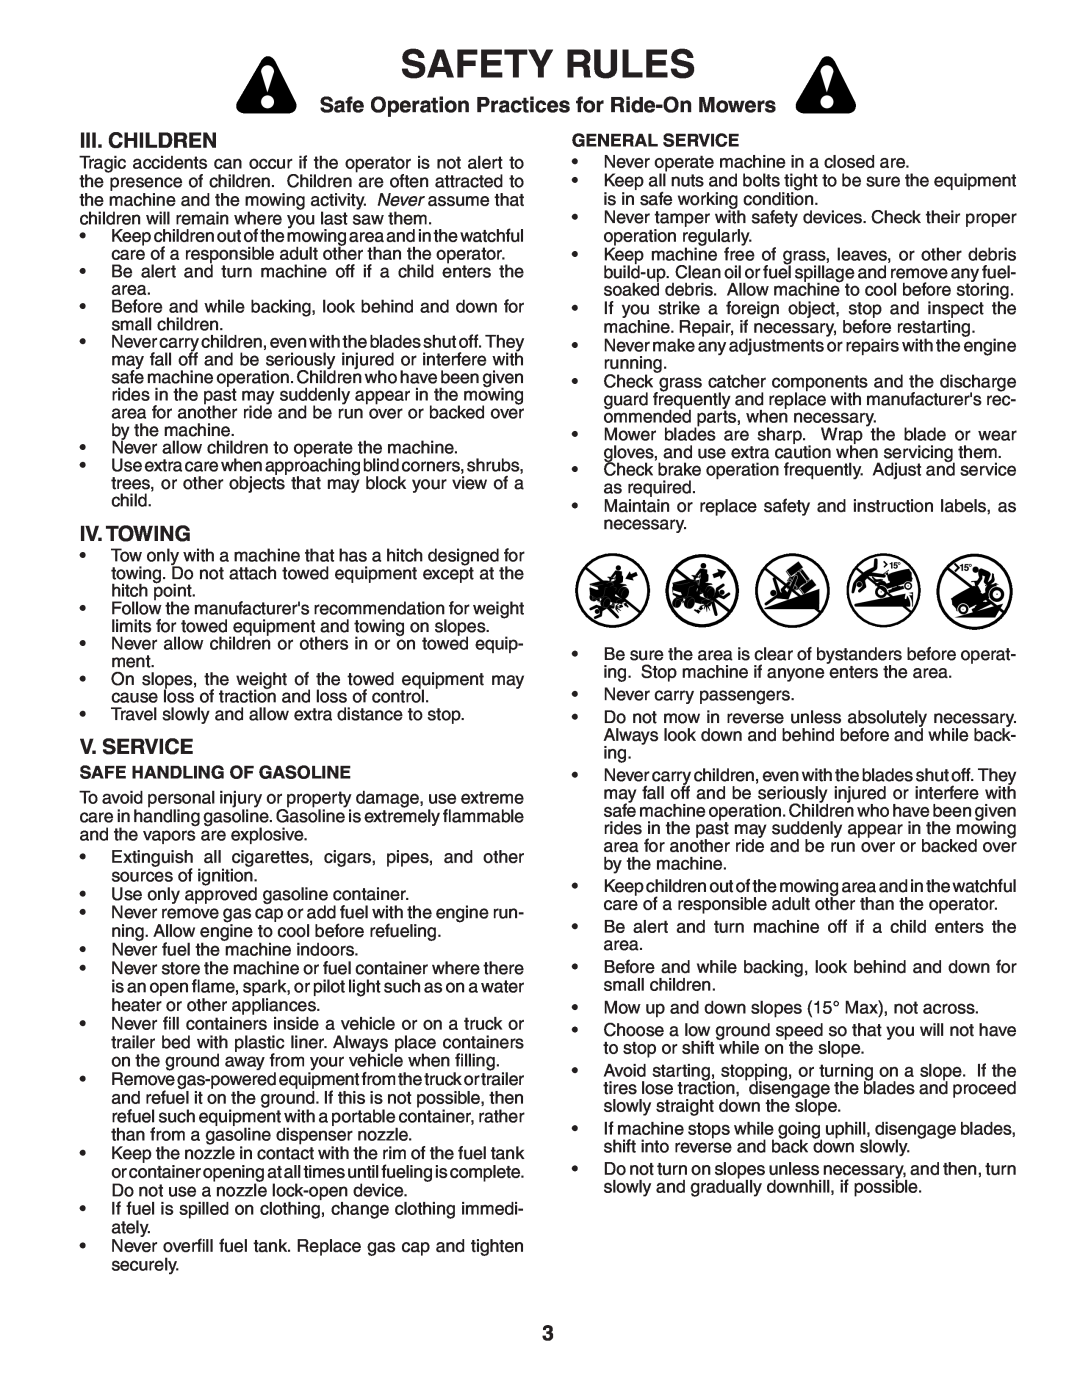 Poulan BB185H42LT manual Iii. Children, Iv. Towing, V. Service, Safety Rules, Safe Operation Practices for Ride-OnMowers 